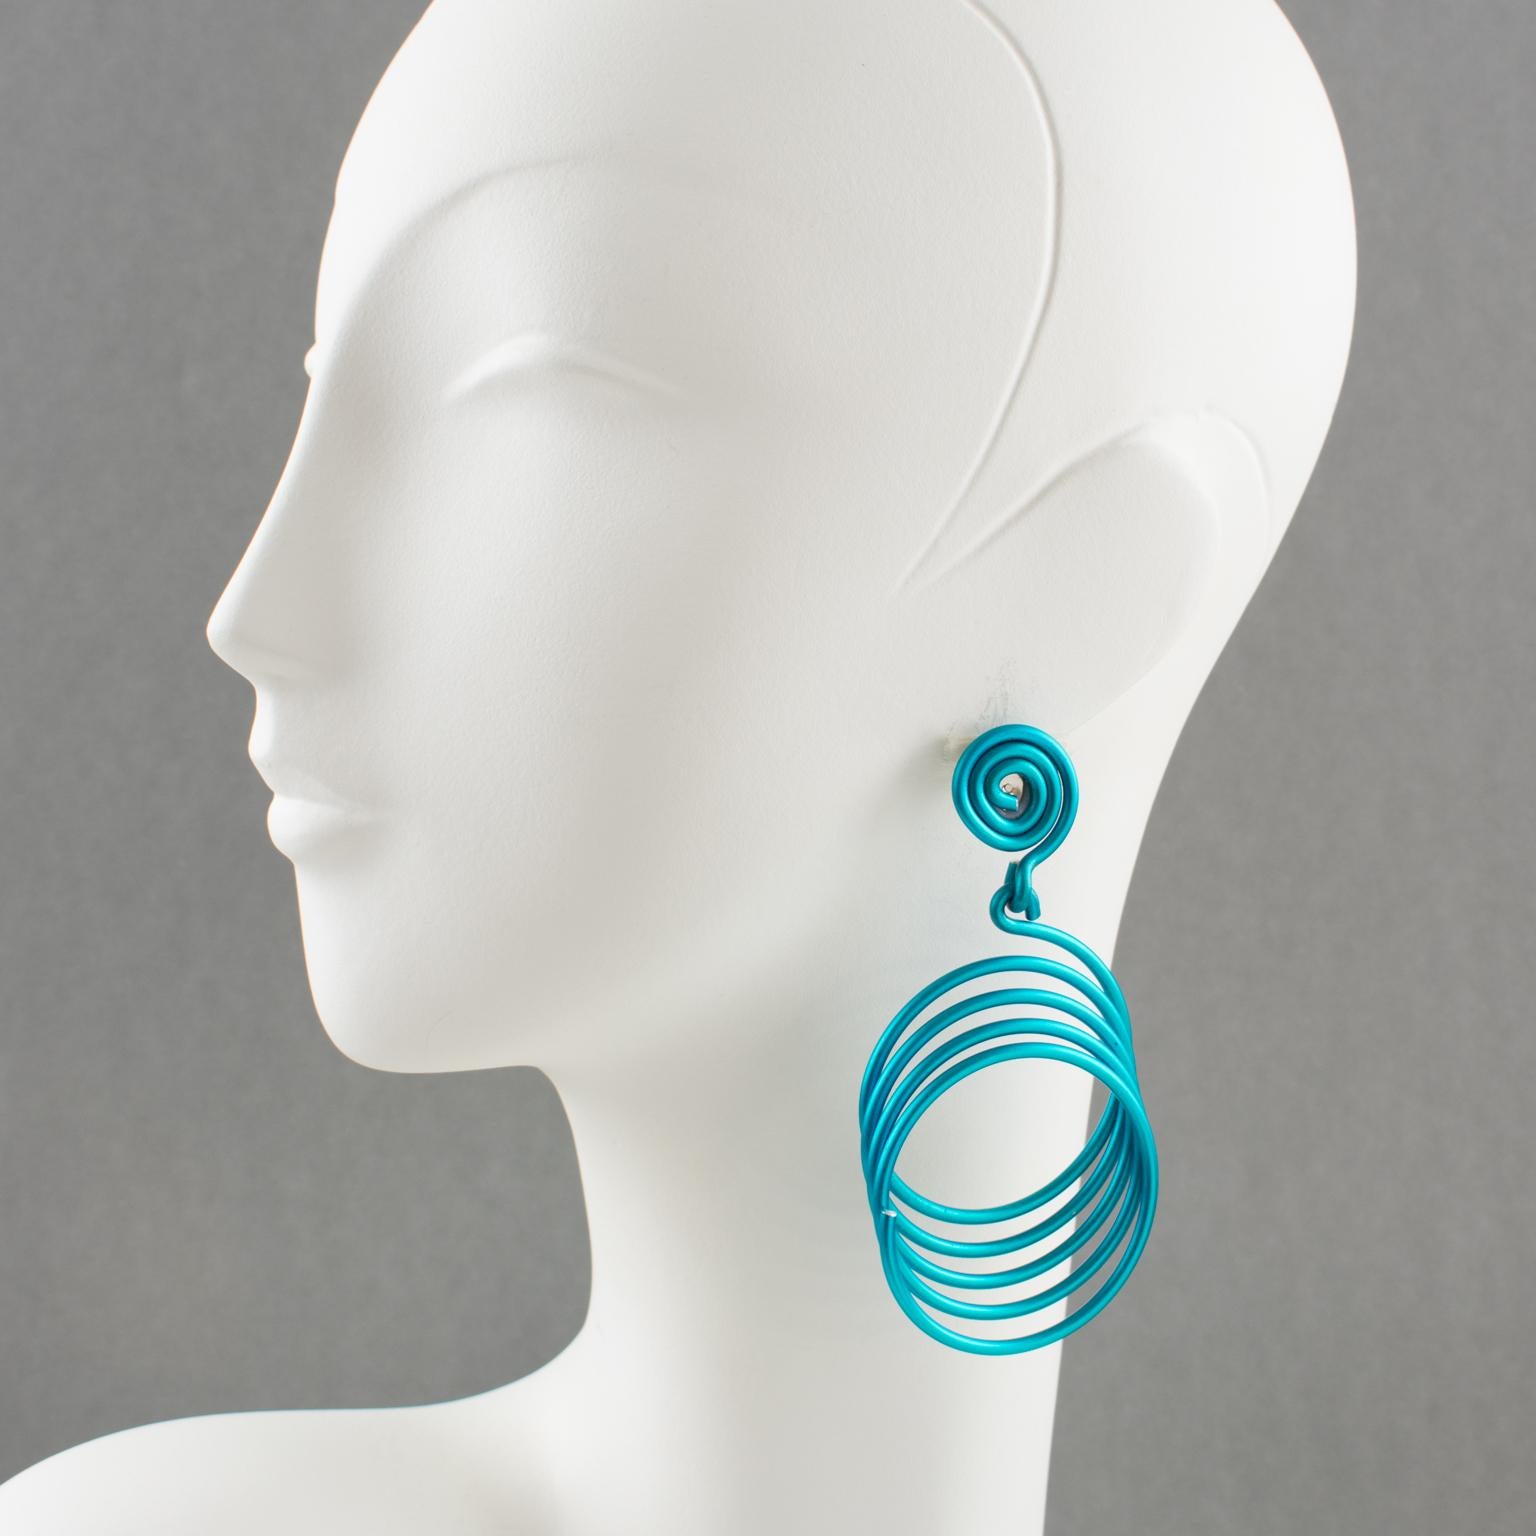 Stunning modernist David Spada New York oversized pierced earrings. The earrings feature a cool Space Age 1980s design with a dangling articulated spiral coiled shape. Anodized aluminum metal with a rich blue color. Signed underside: 